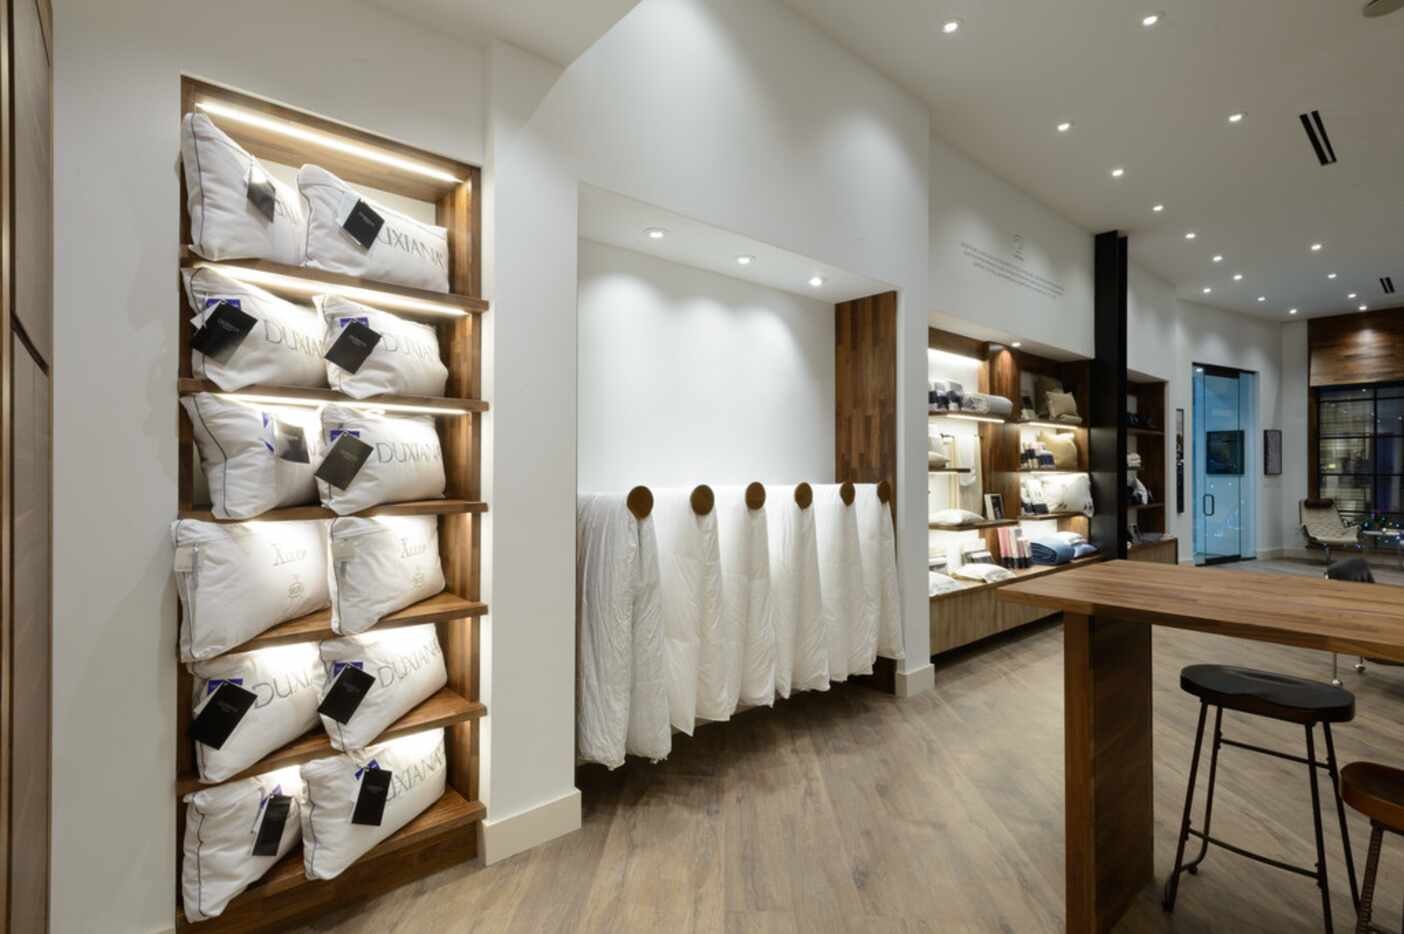 In addition to its luxury beds, the new Duxiana store on Knox Street offers linens and...